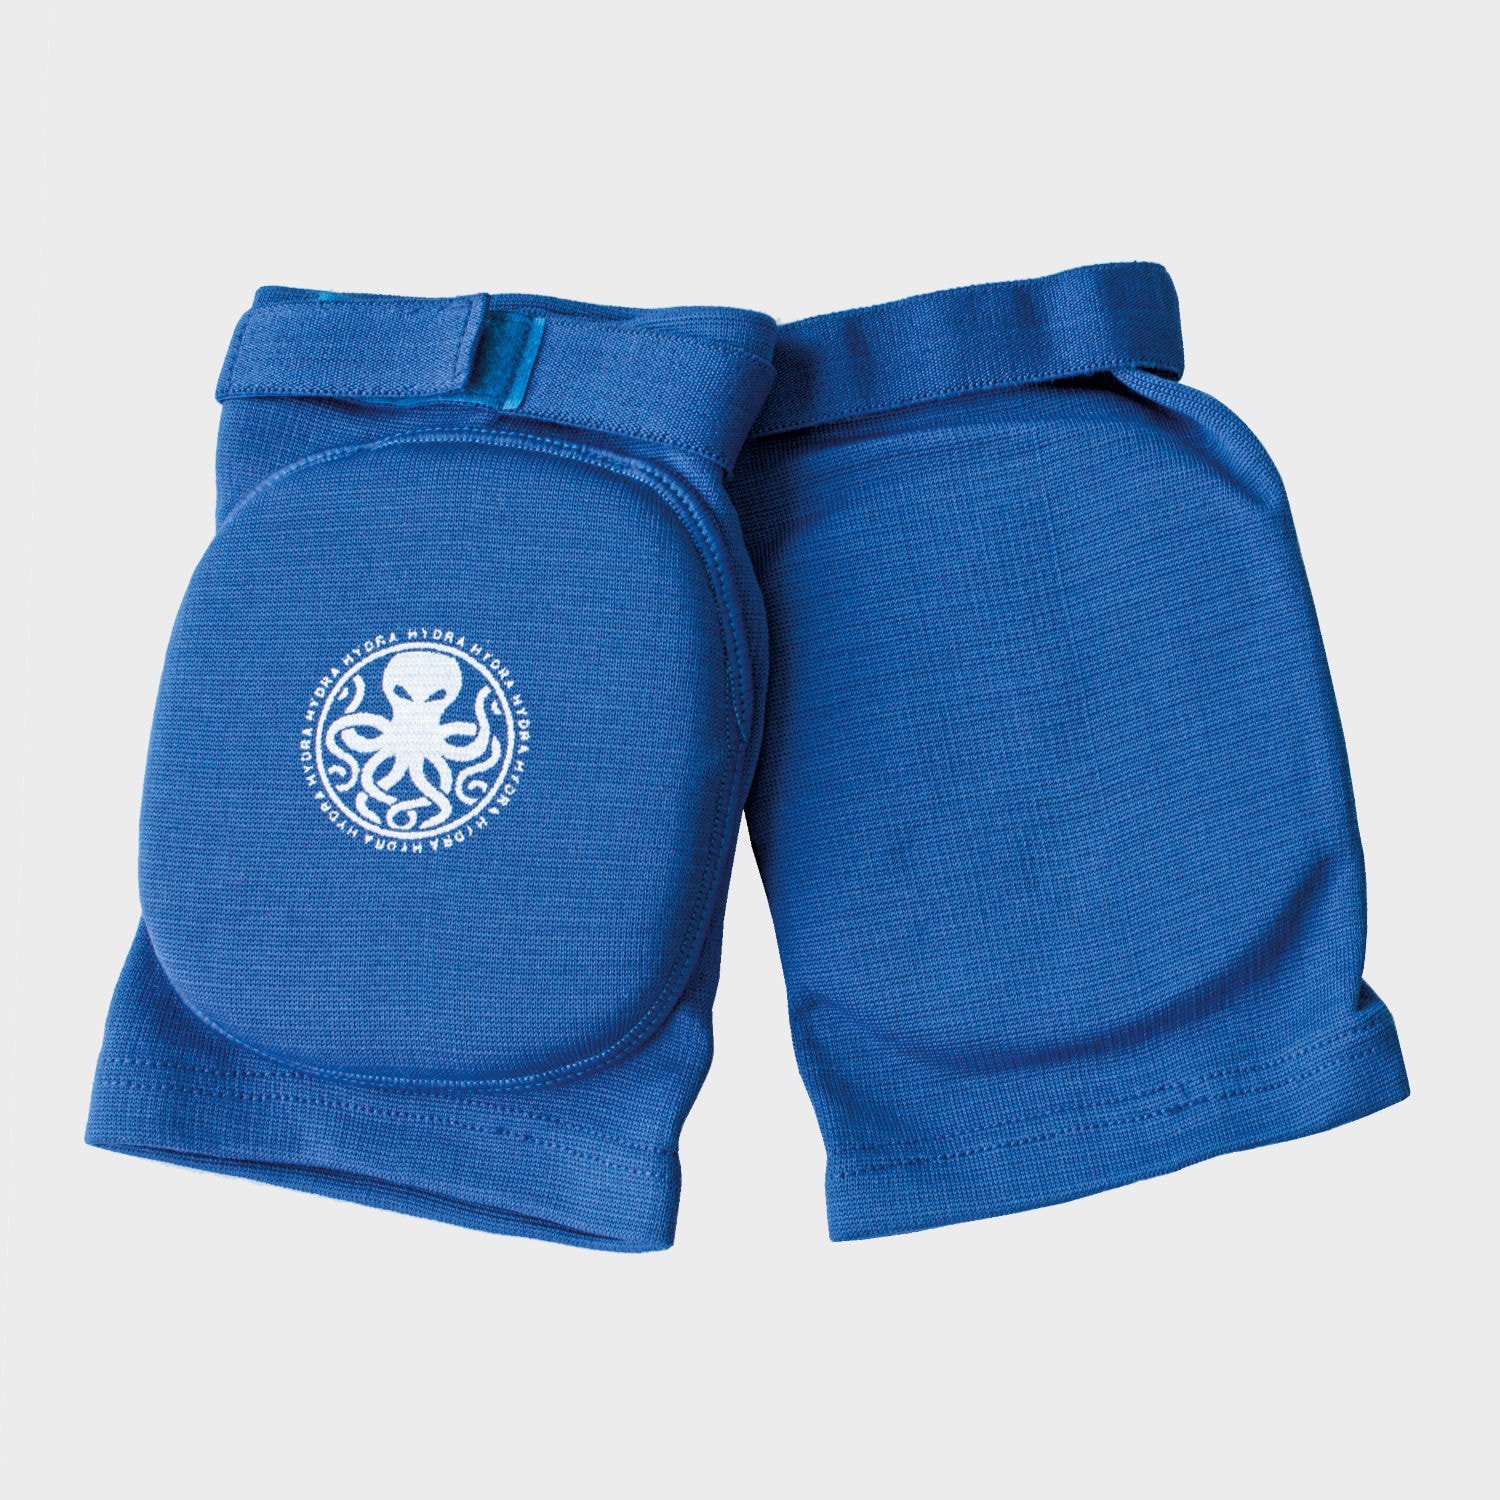 Hydra Blue Competition Elbow Pads - Hydra